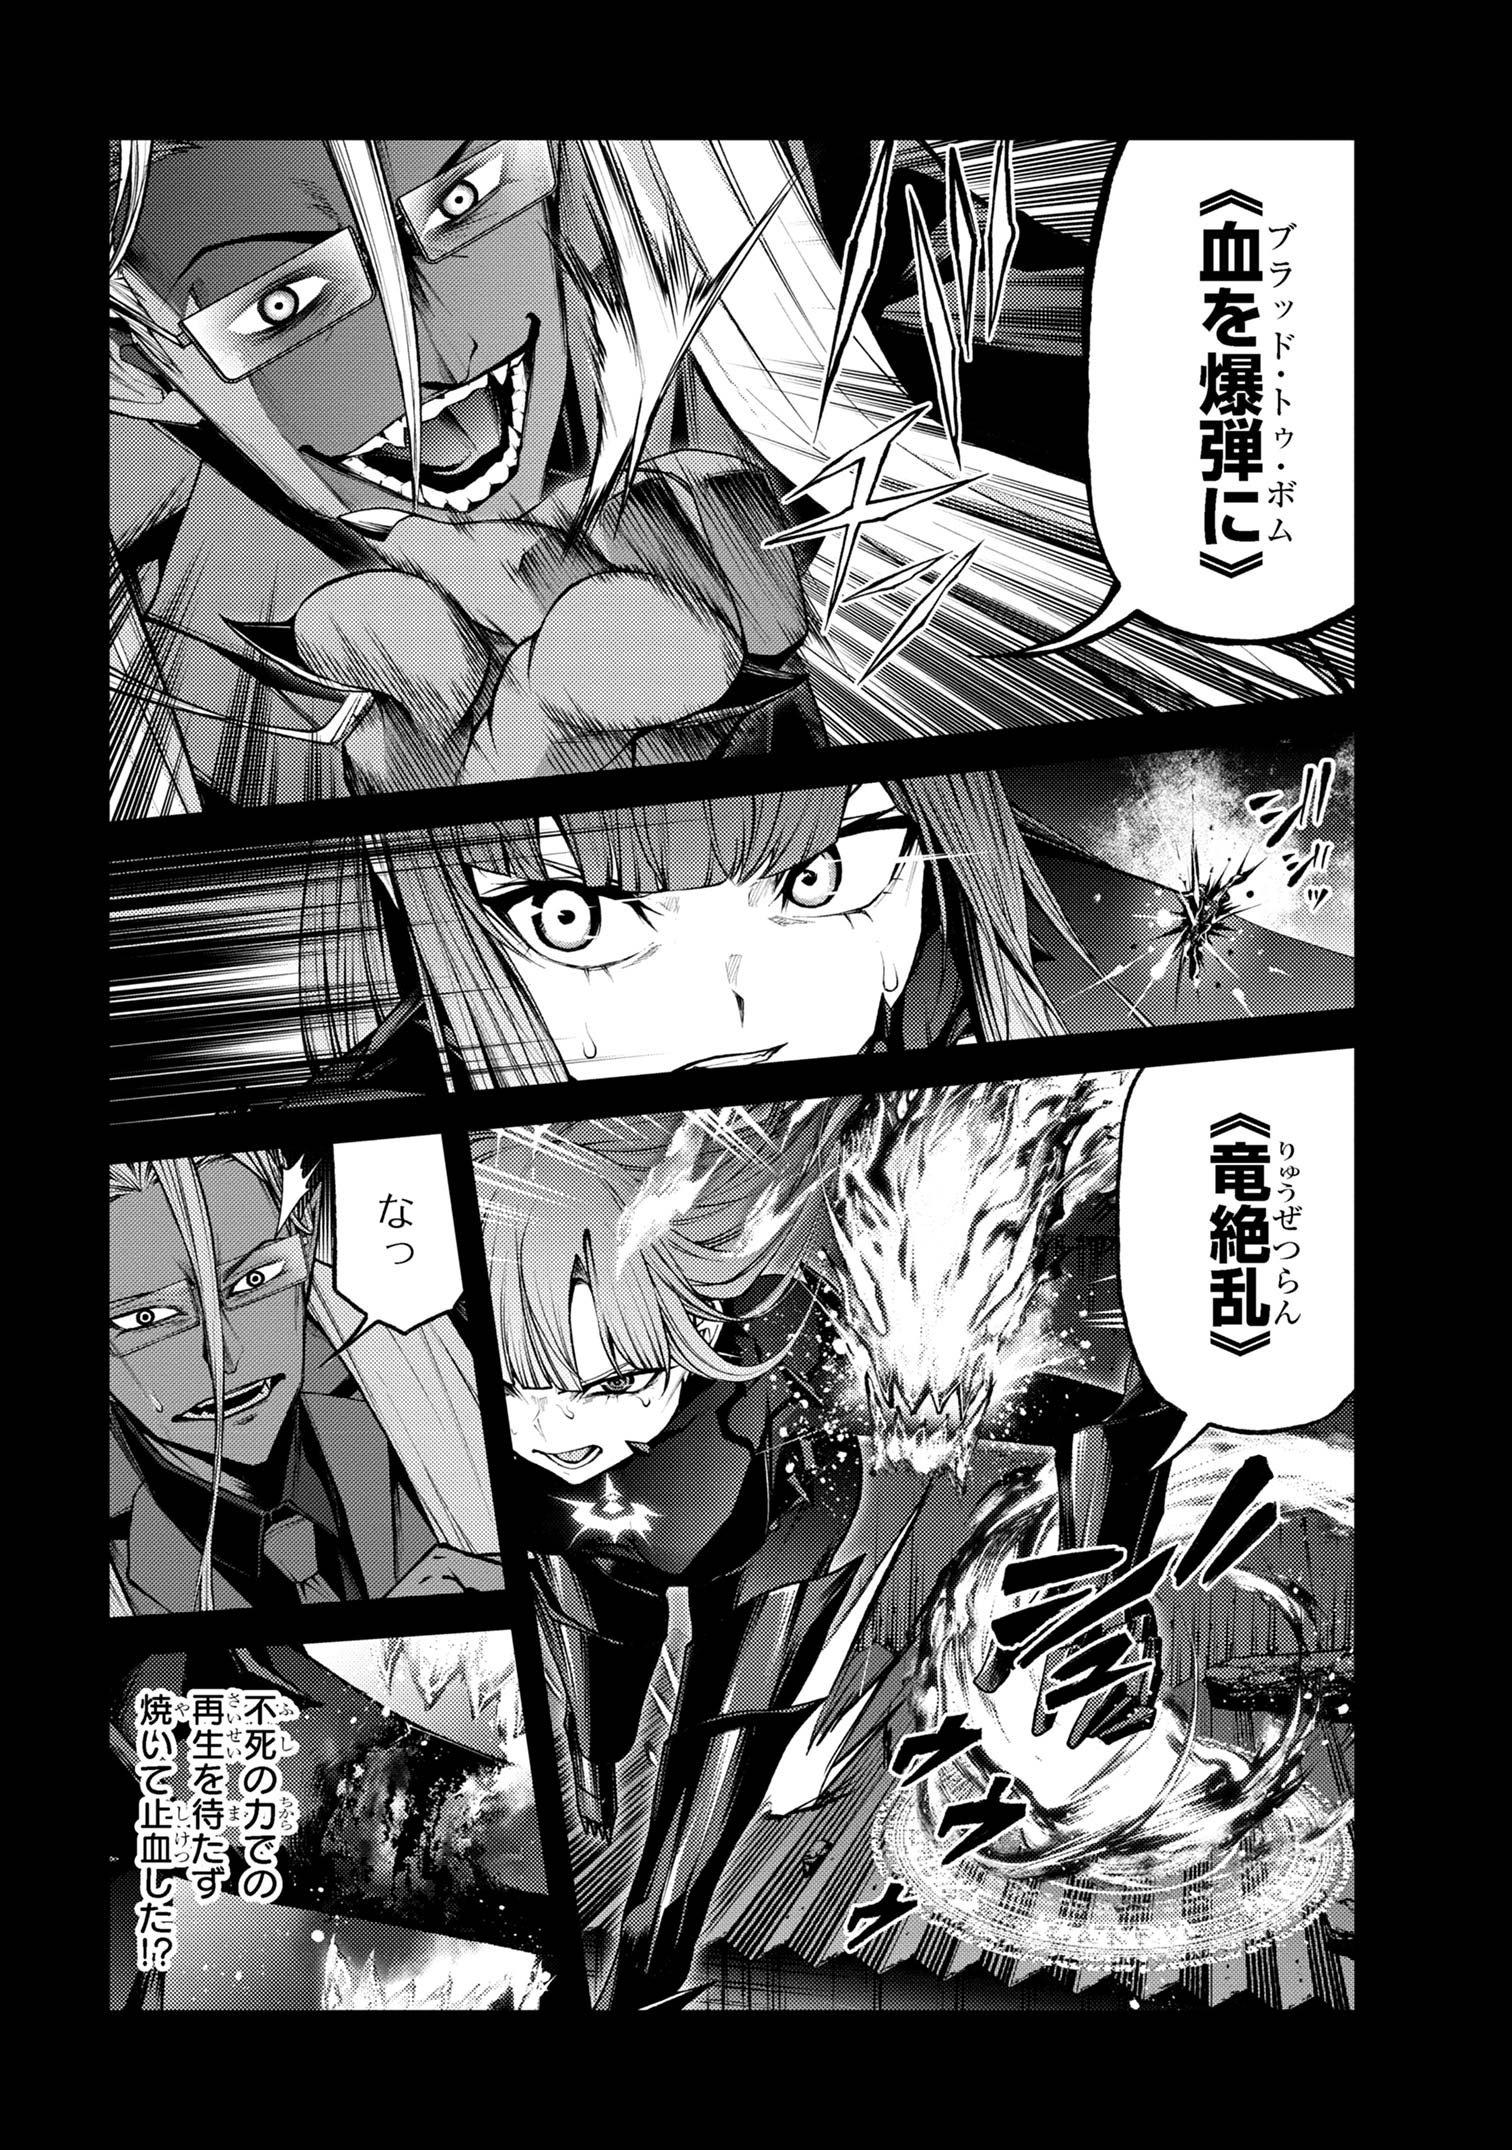 Maou 2099 - Chapter 8.2 - Page 4